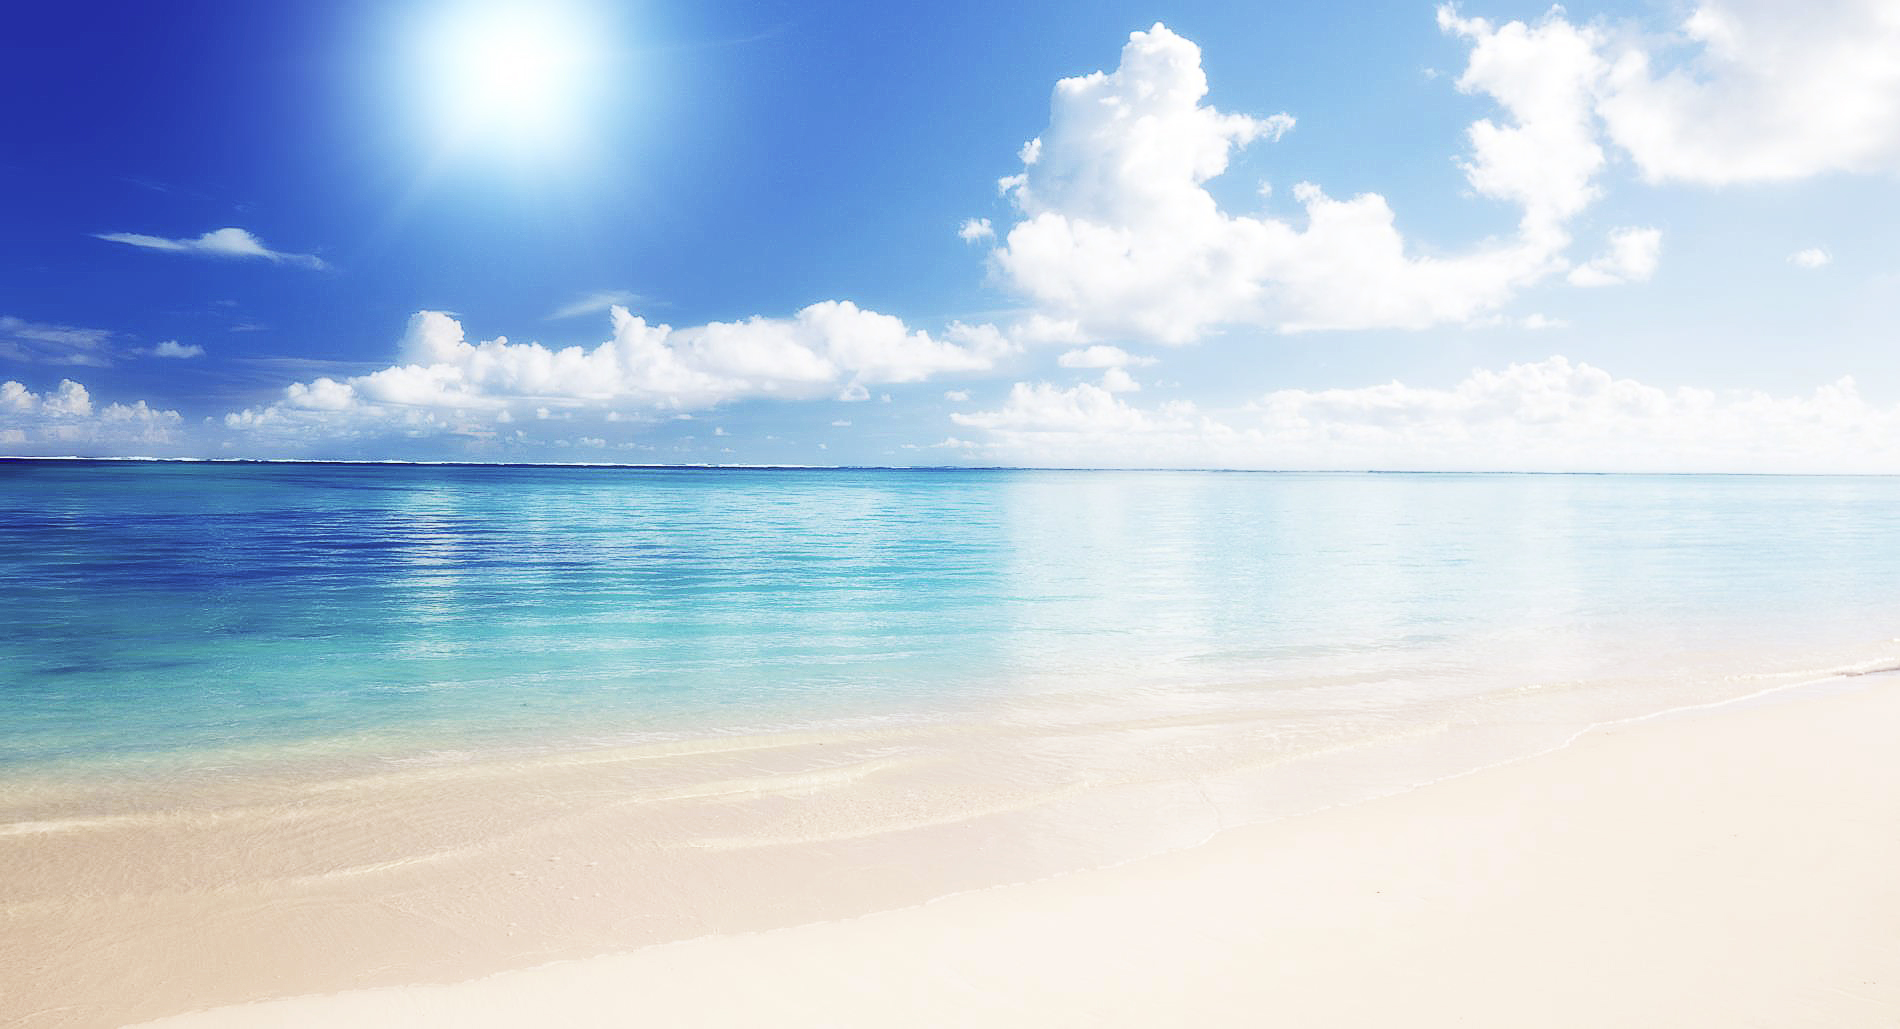 16 Beach Backgrounds PSDGraphics Images   Beach Sand